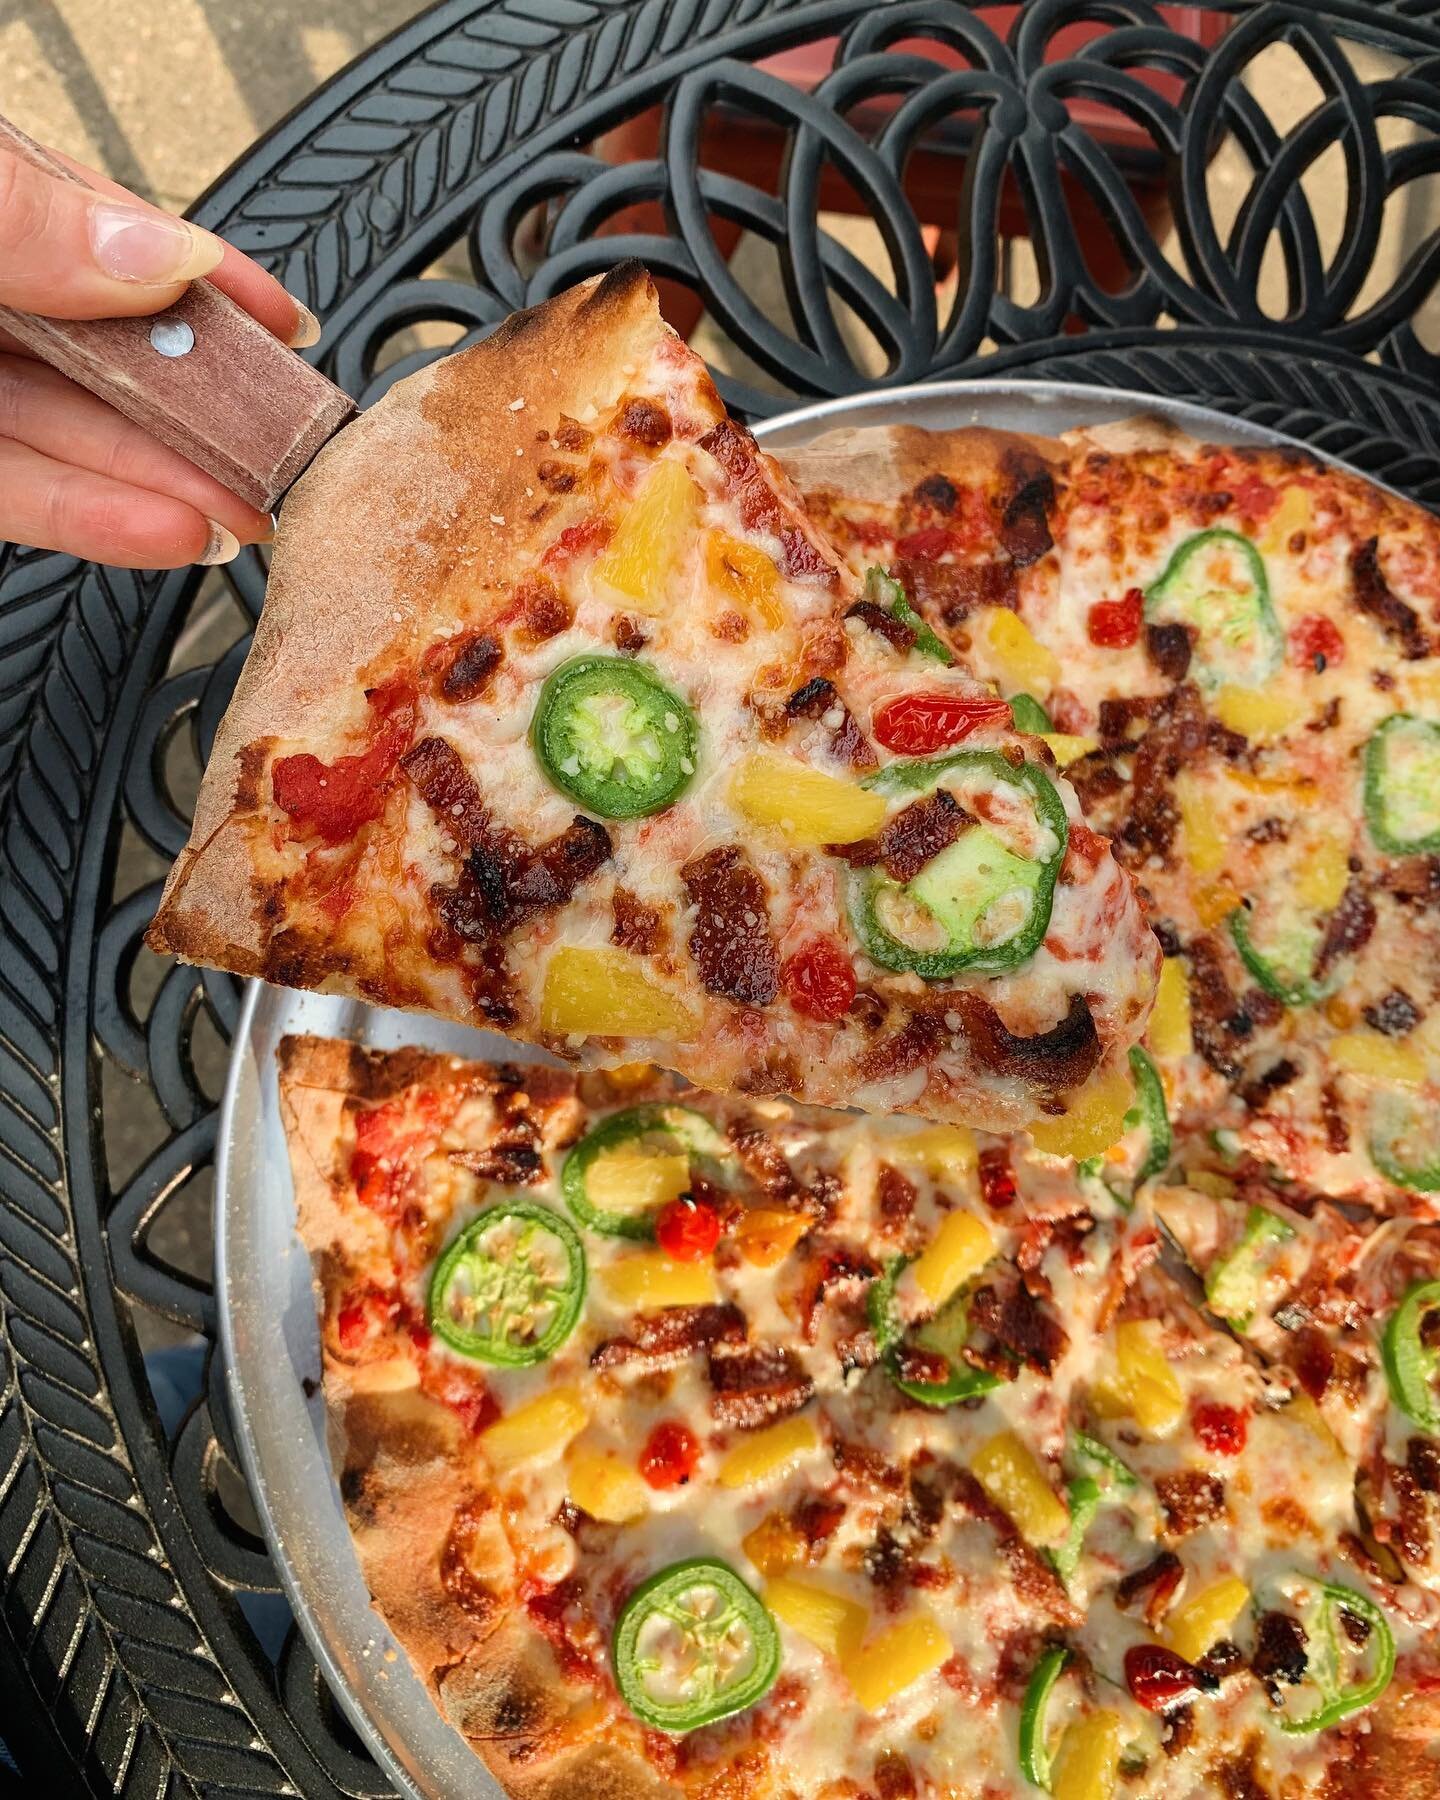 Our NEW, &amp; most controversial pizza yet, 𝐒𝐩𝐢𝐜𝐲 𝐇𝐚𝐰𝐚𝐢𝐢𝐚𝐧 🍍🌴🍕 you either love it or hate it&hellip; but we LOVE it!!! Smothered with pineapple, jalape&ntilde;o, bacon, and sweet pepper drops, it&rsquo;s the perfect combination of sw